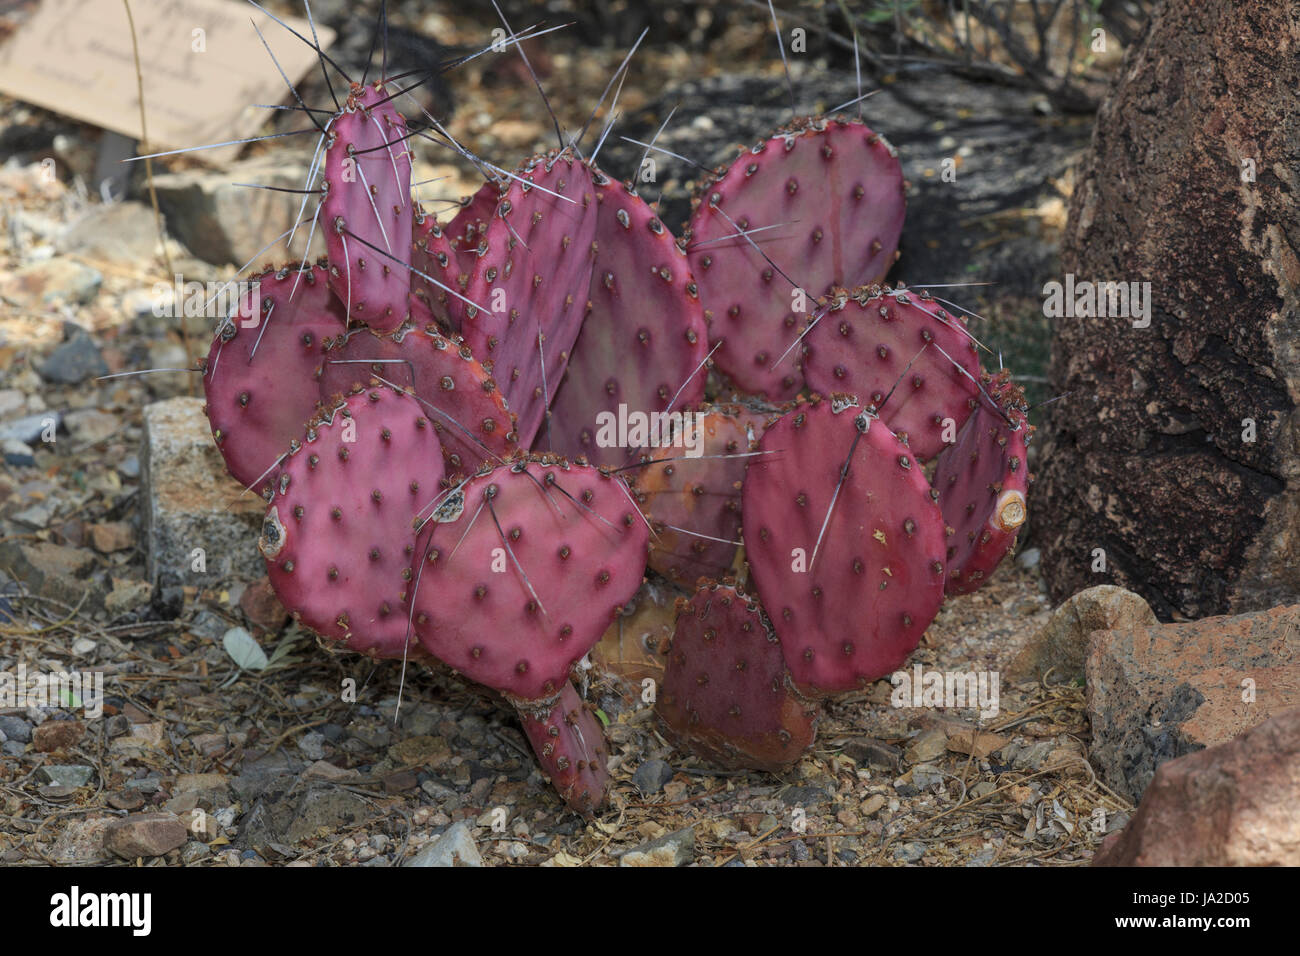 Purple Prickly Pear Cactus High Resolution Stock Photography And Images Alamy